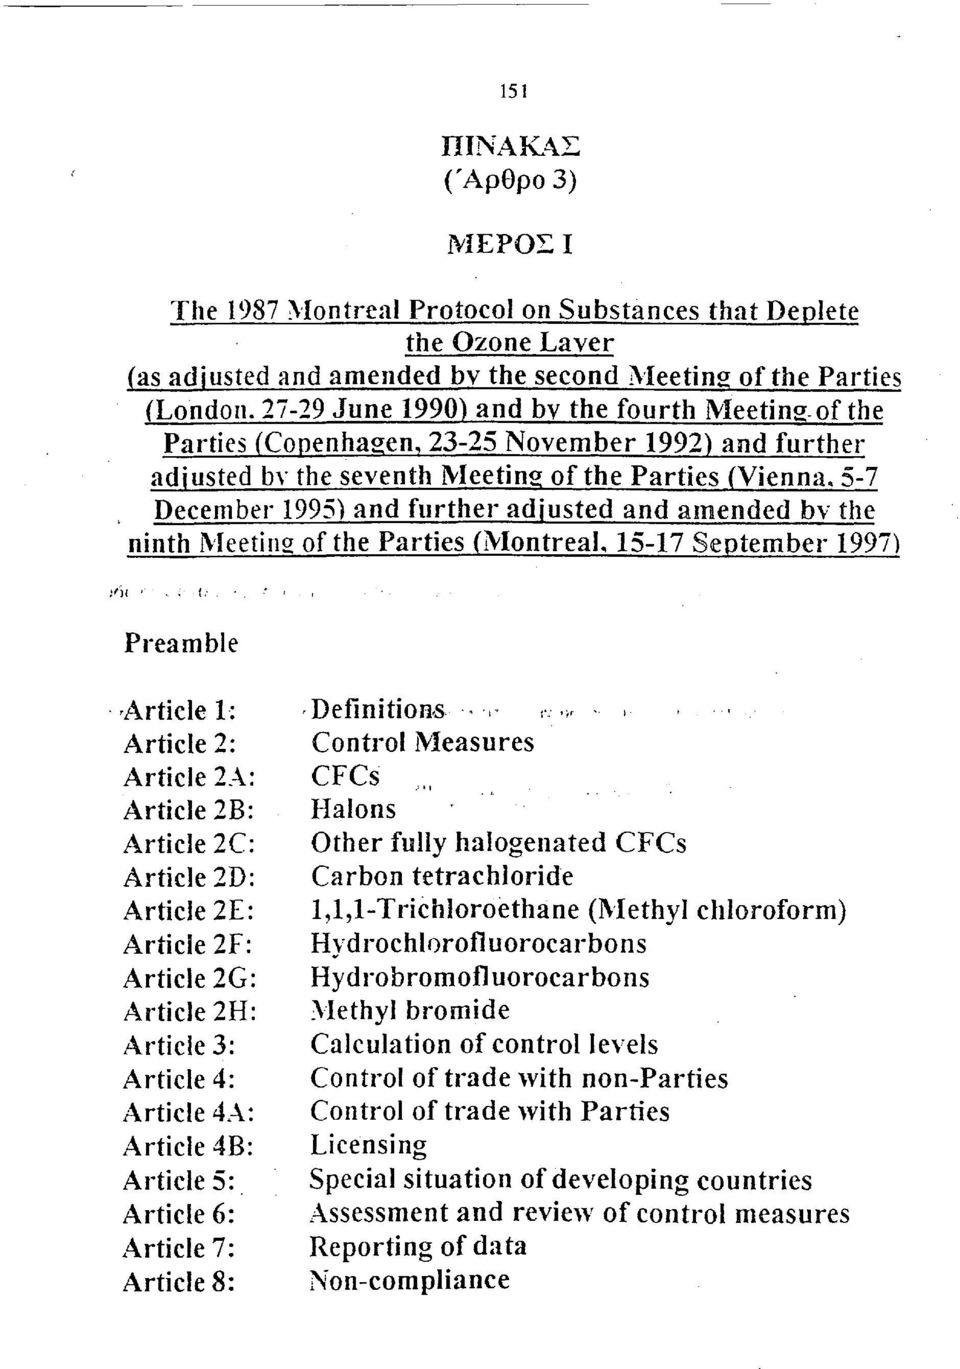 5-7 December 1995) and further adjusted and amended bv the ninth Meeting of the Parties (Montreal, 15-17 September 1997) Preamble Art Art Art Art Art Art Art] icle 1: icle2: tele 2A Definitions >- <